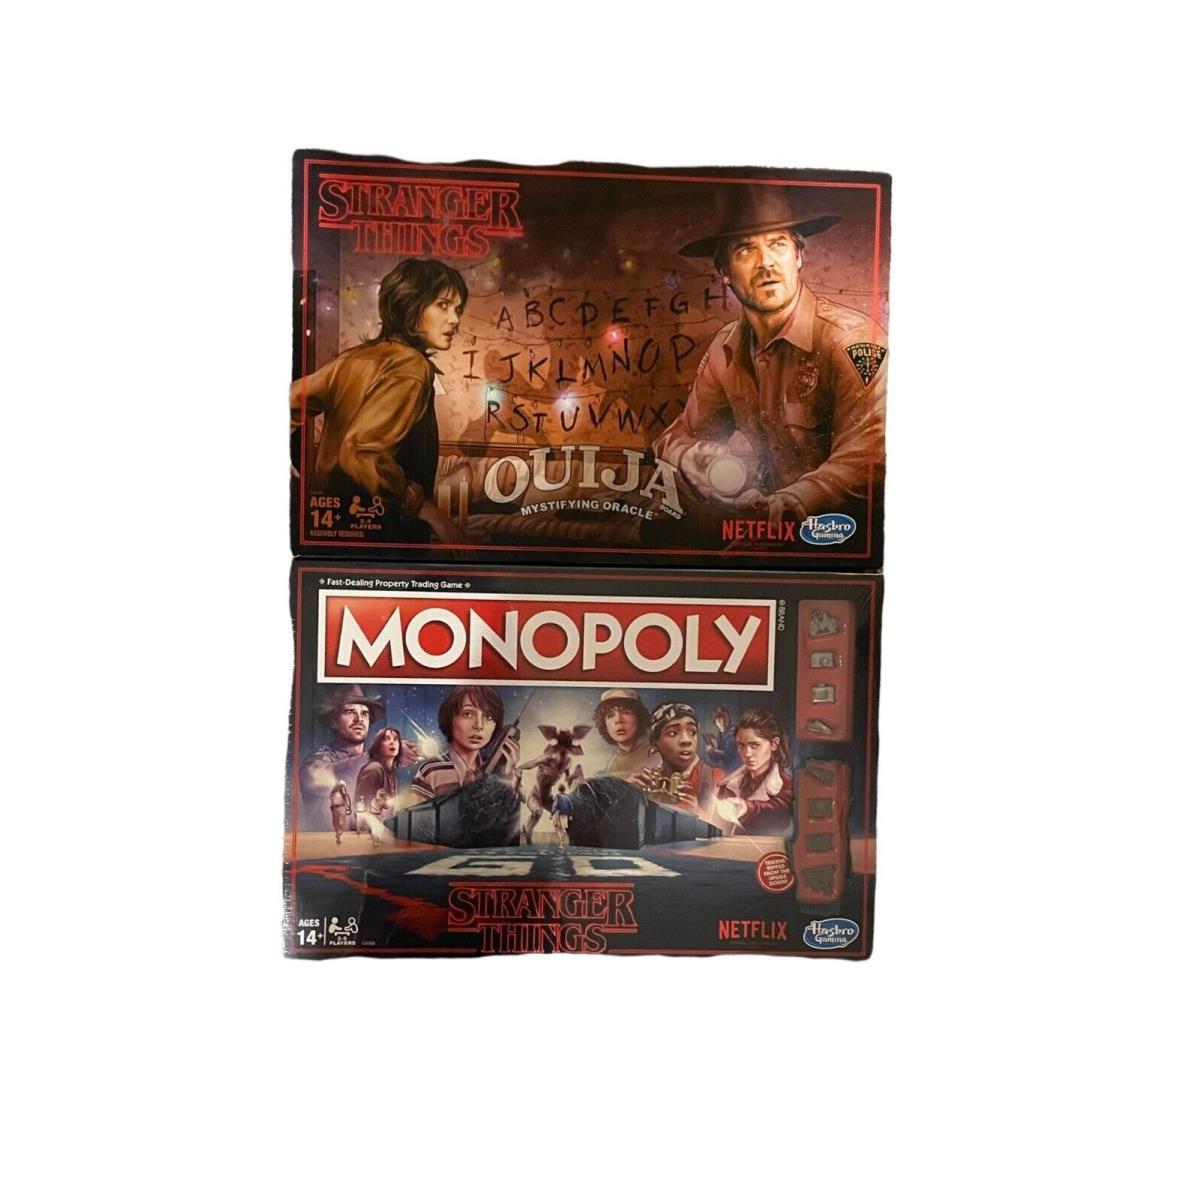 Monopoly Stranger Things Edition Board Game and Stranger Things Ouija Board